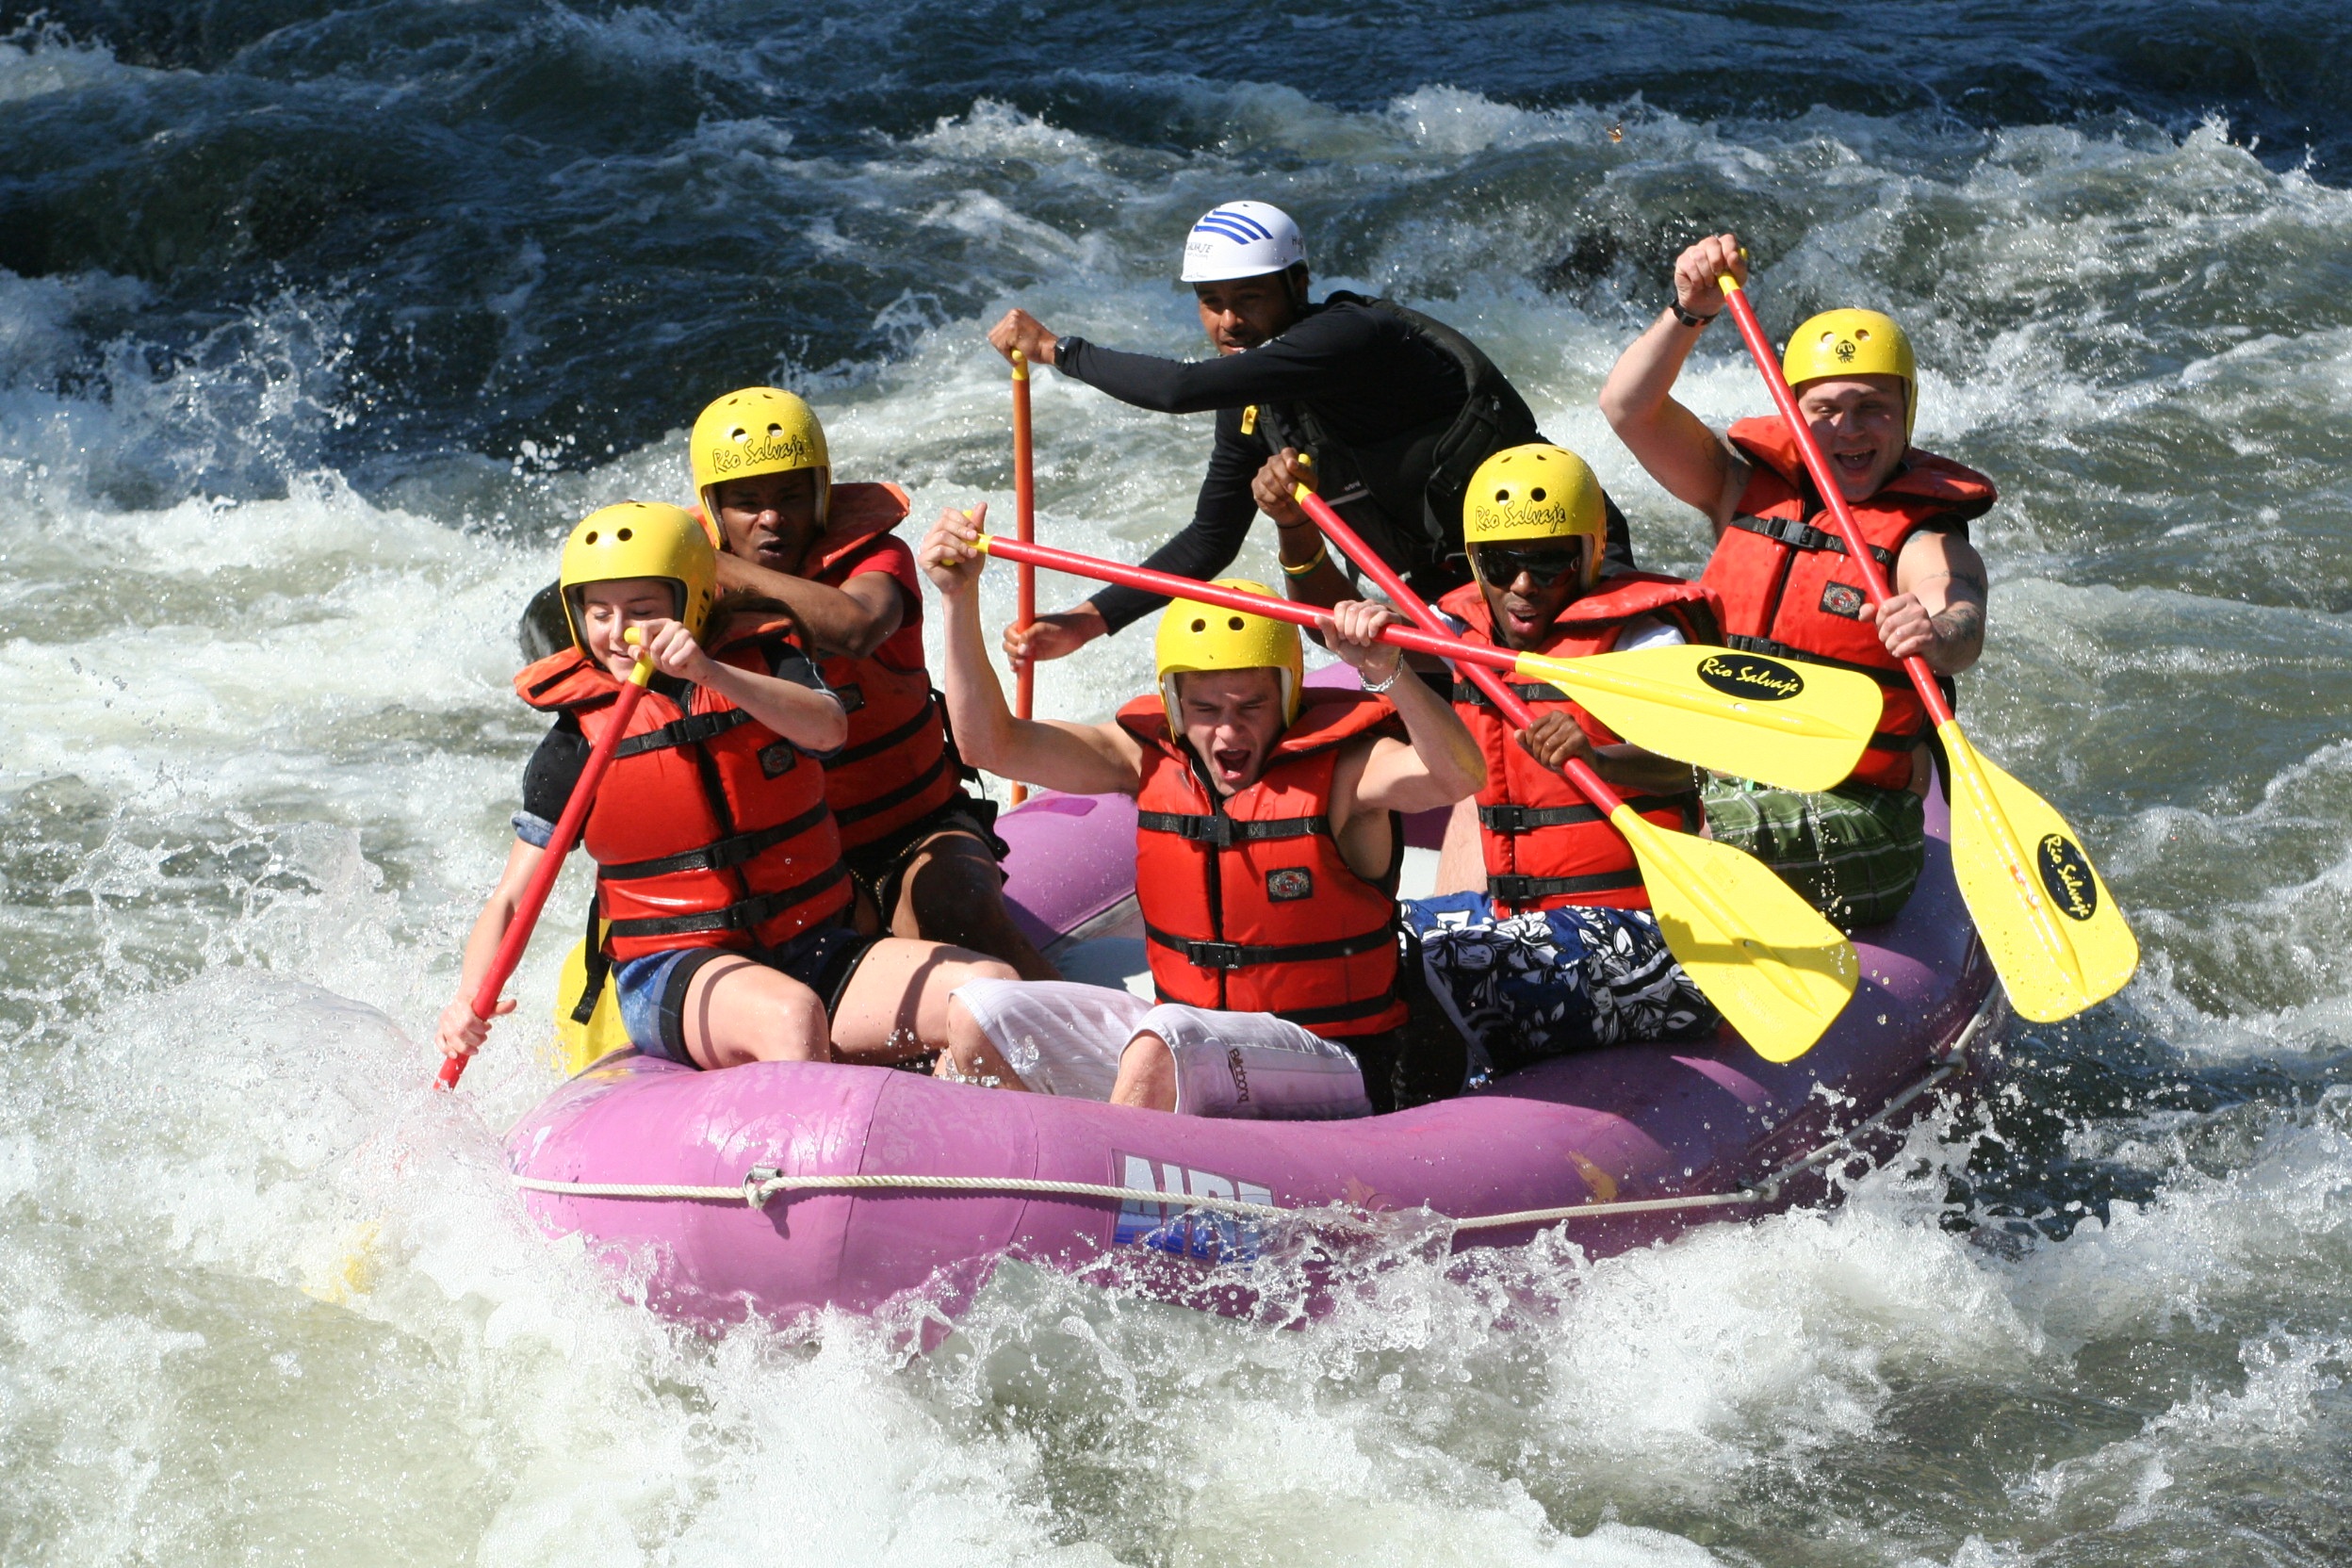 sports, white water rafting, boat, outdoor, people, raft, water